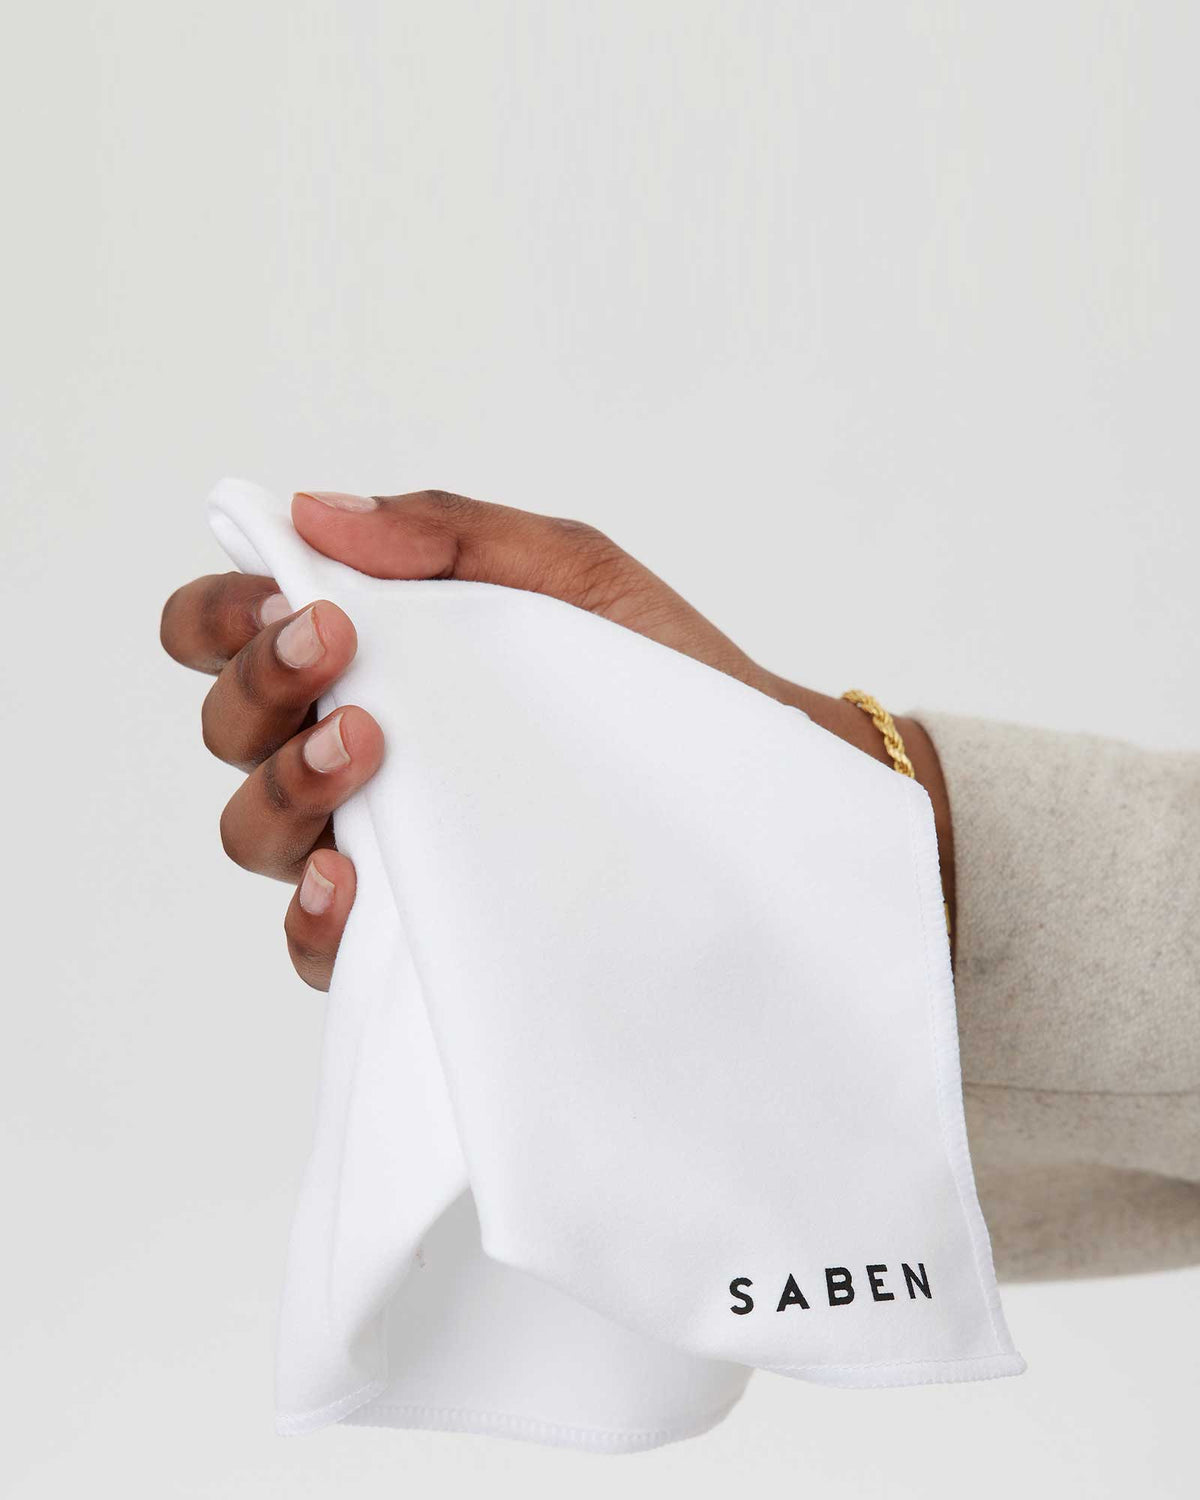 Saben Cleaning Cloth